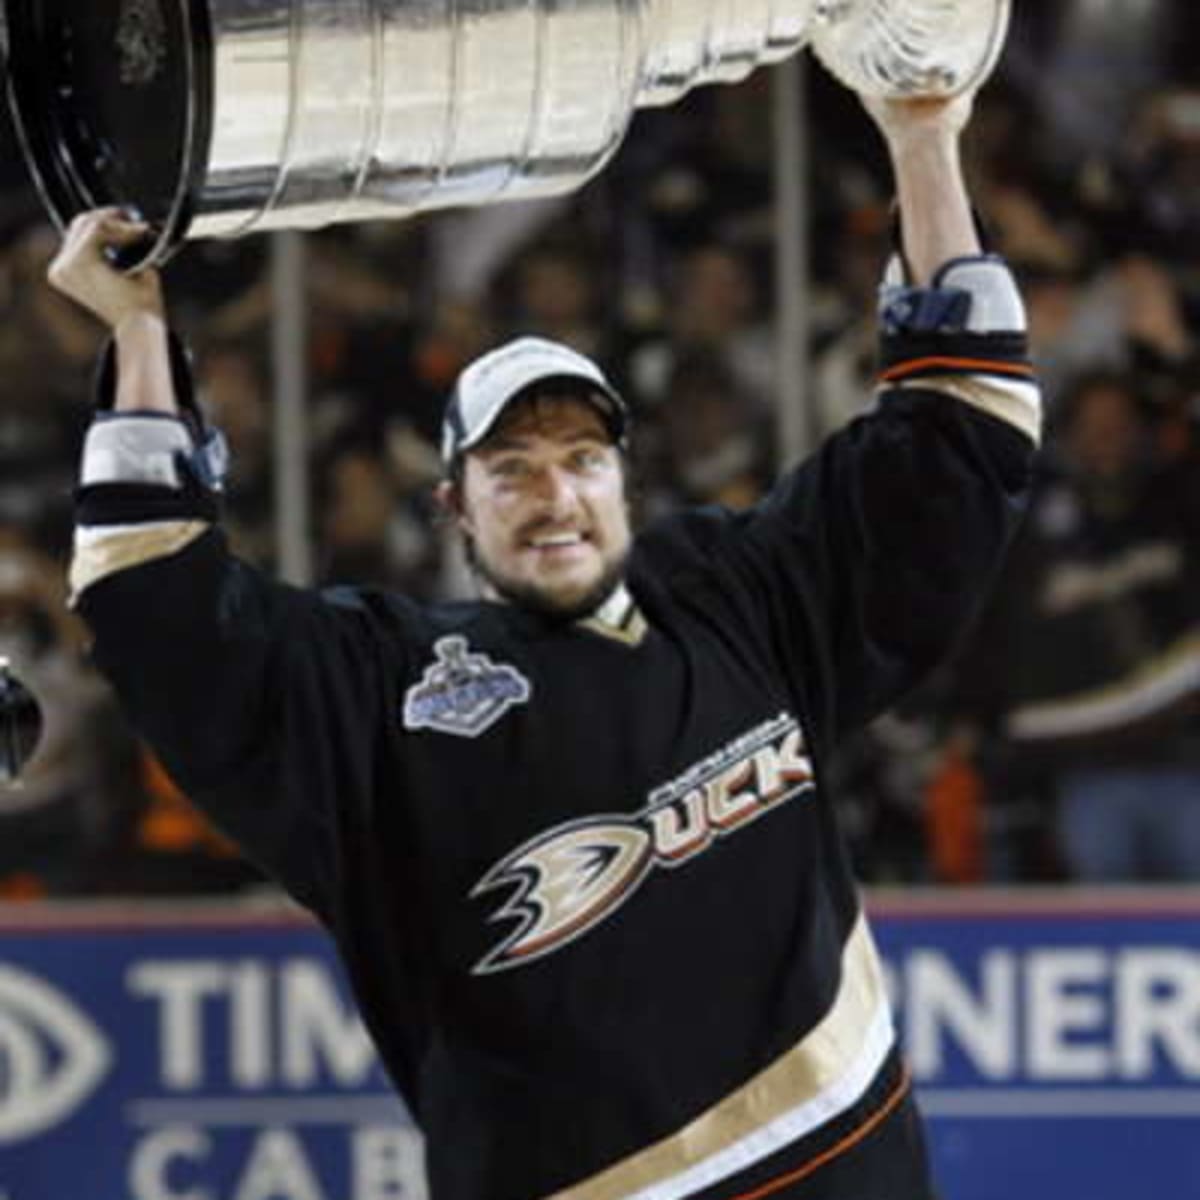 Teemu Selanne reflects on a well-played career with the Ducks